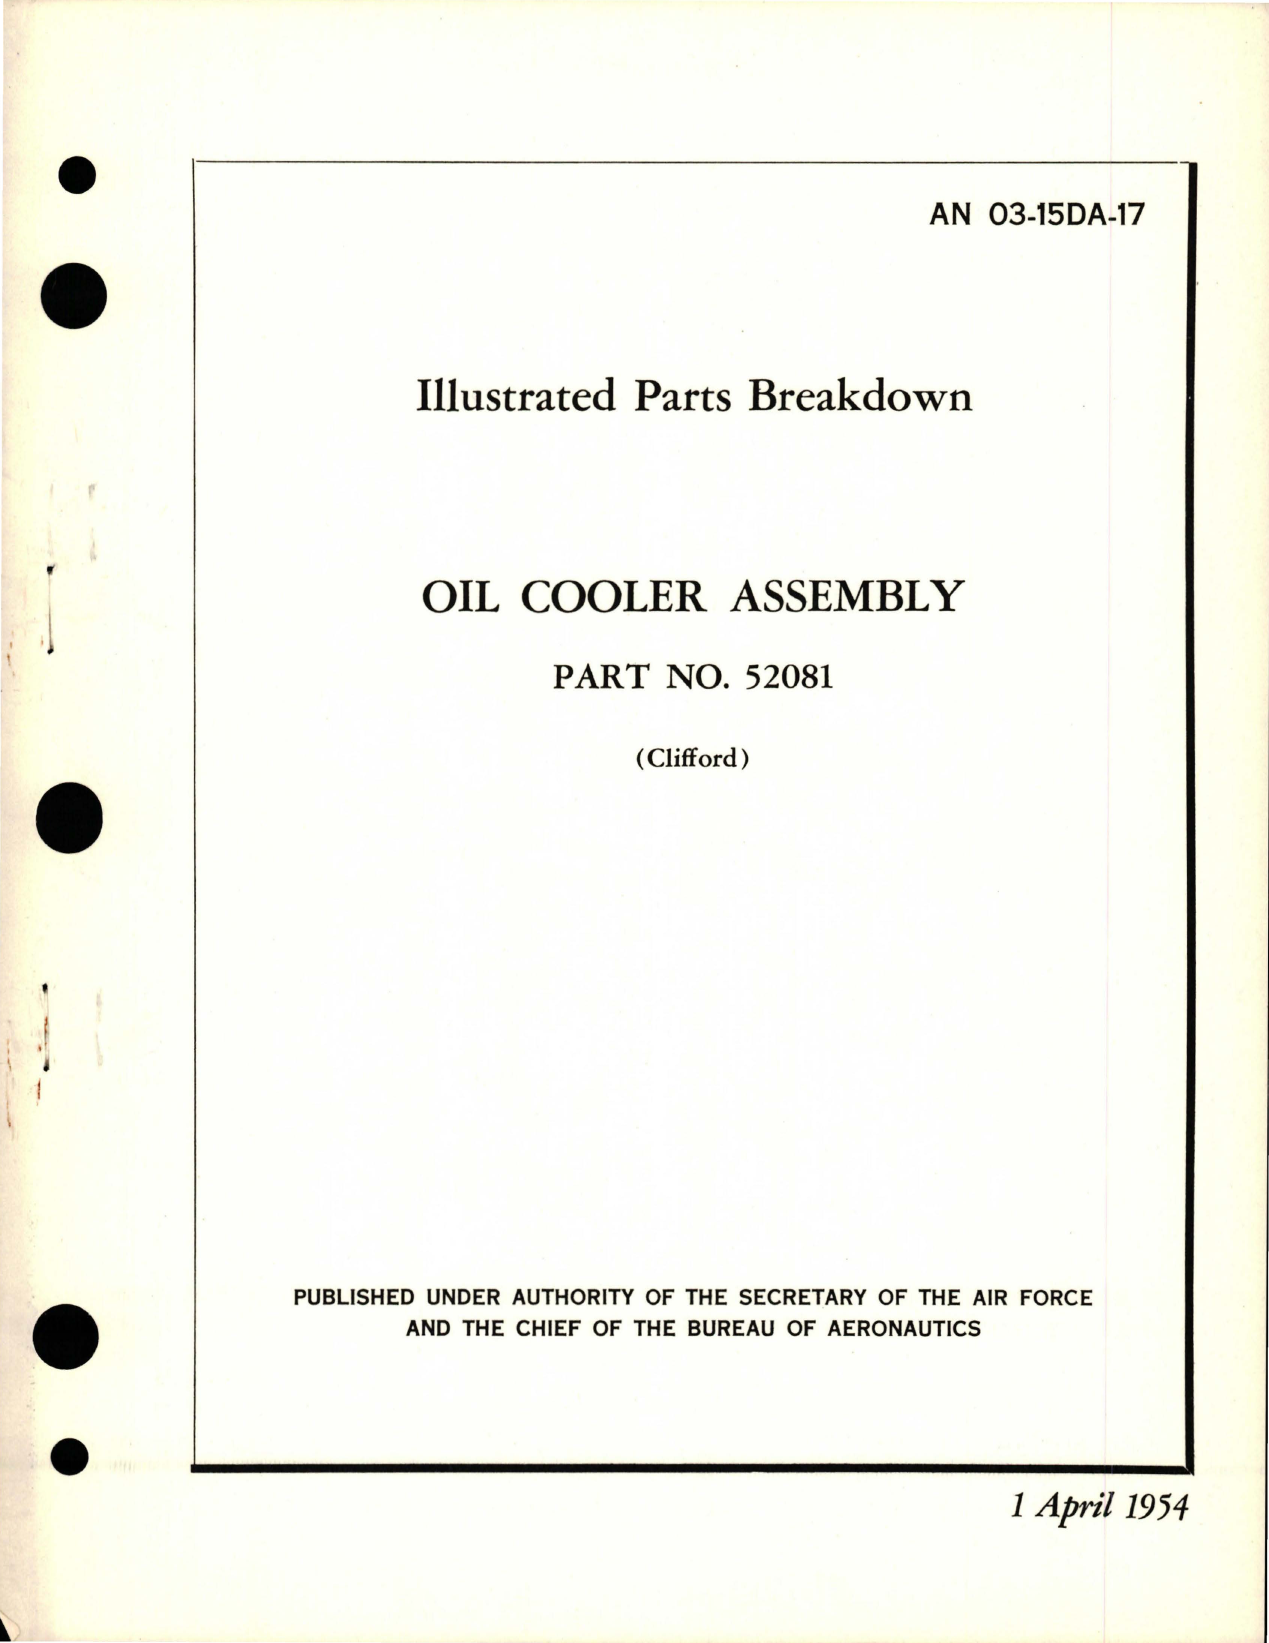 Sample page 1 from AirCorps Library document: Illustrated Parts Breakdown for Oil Cooler Assembly - Part 52081